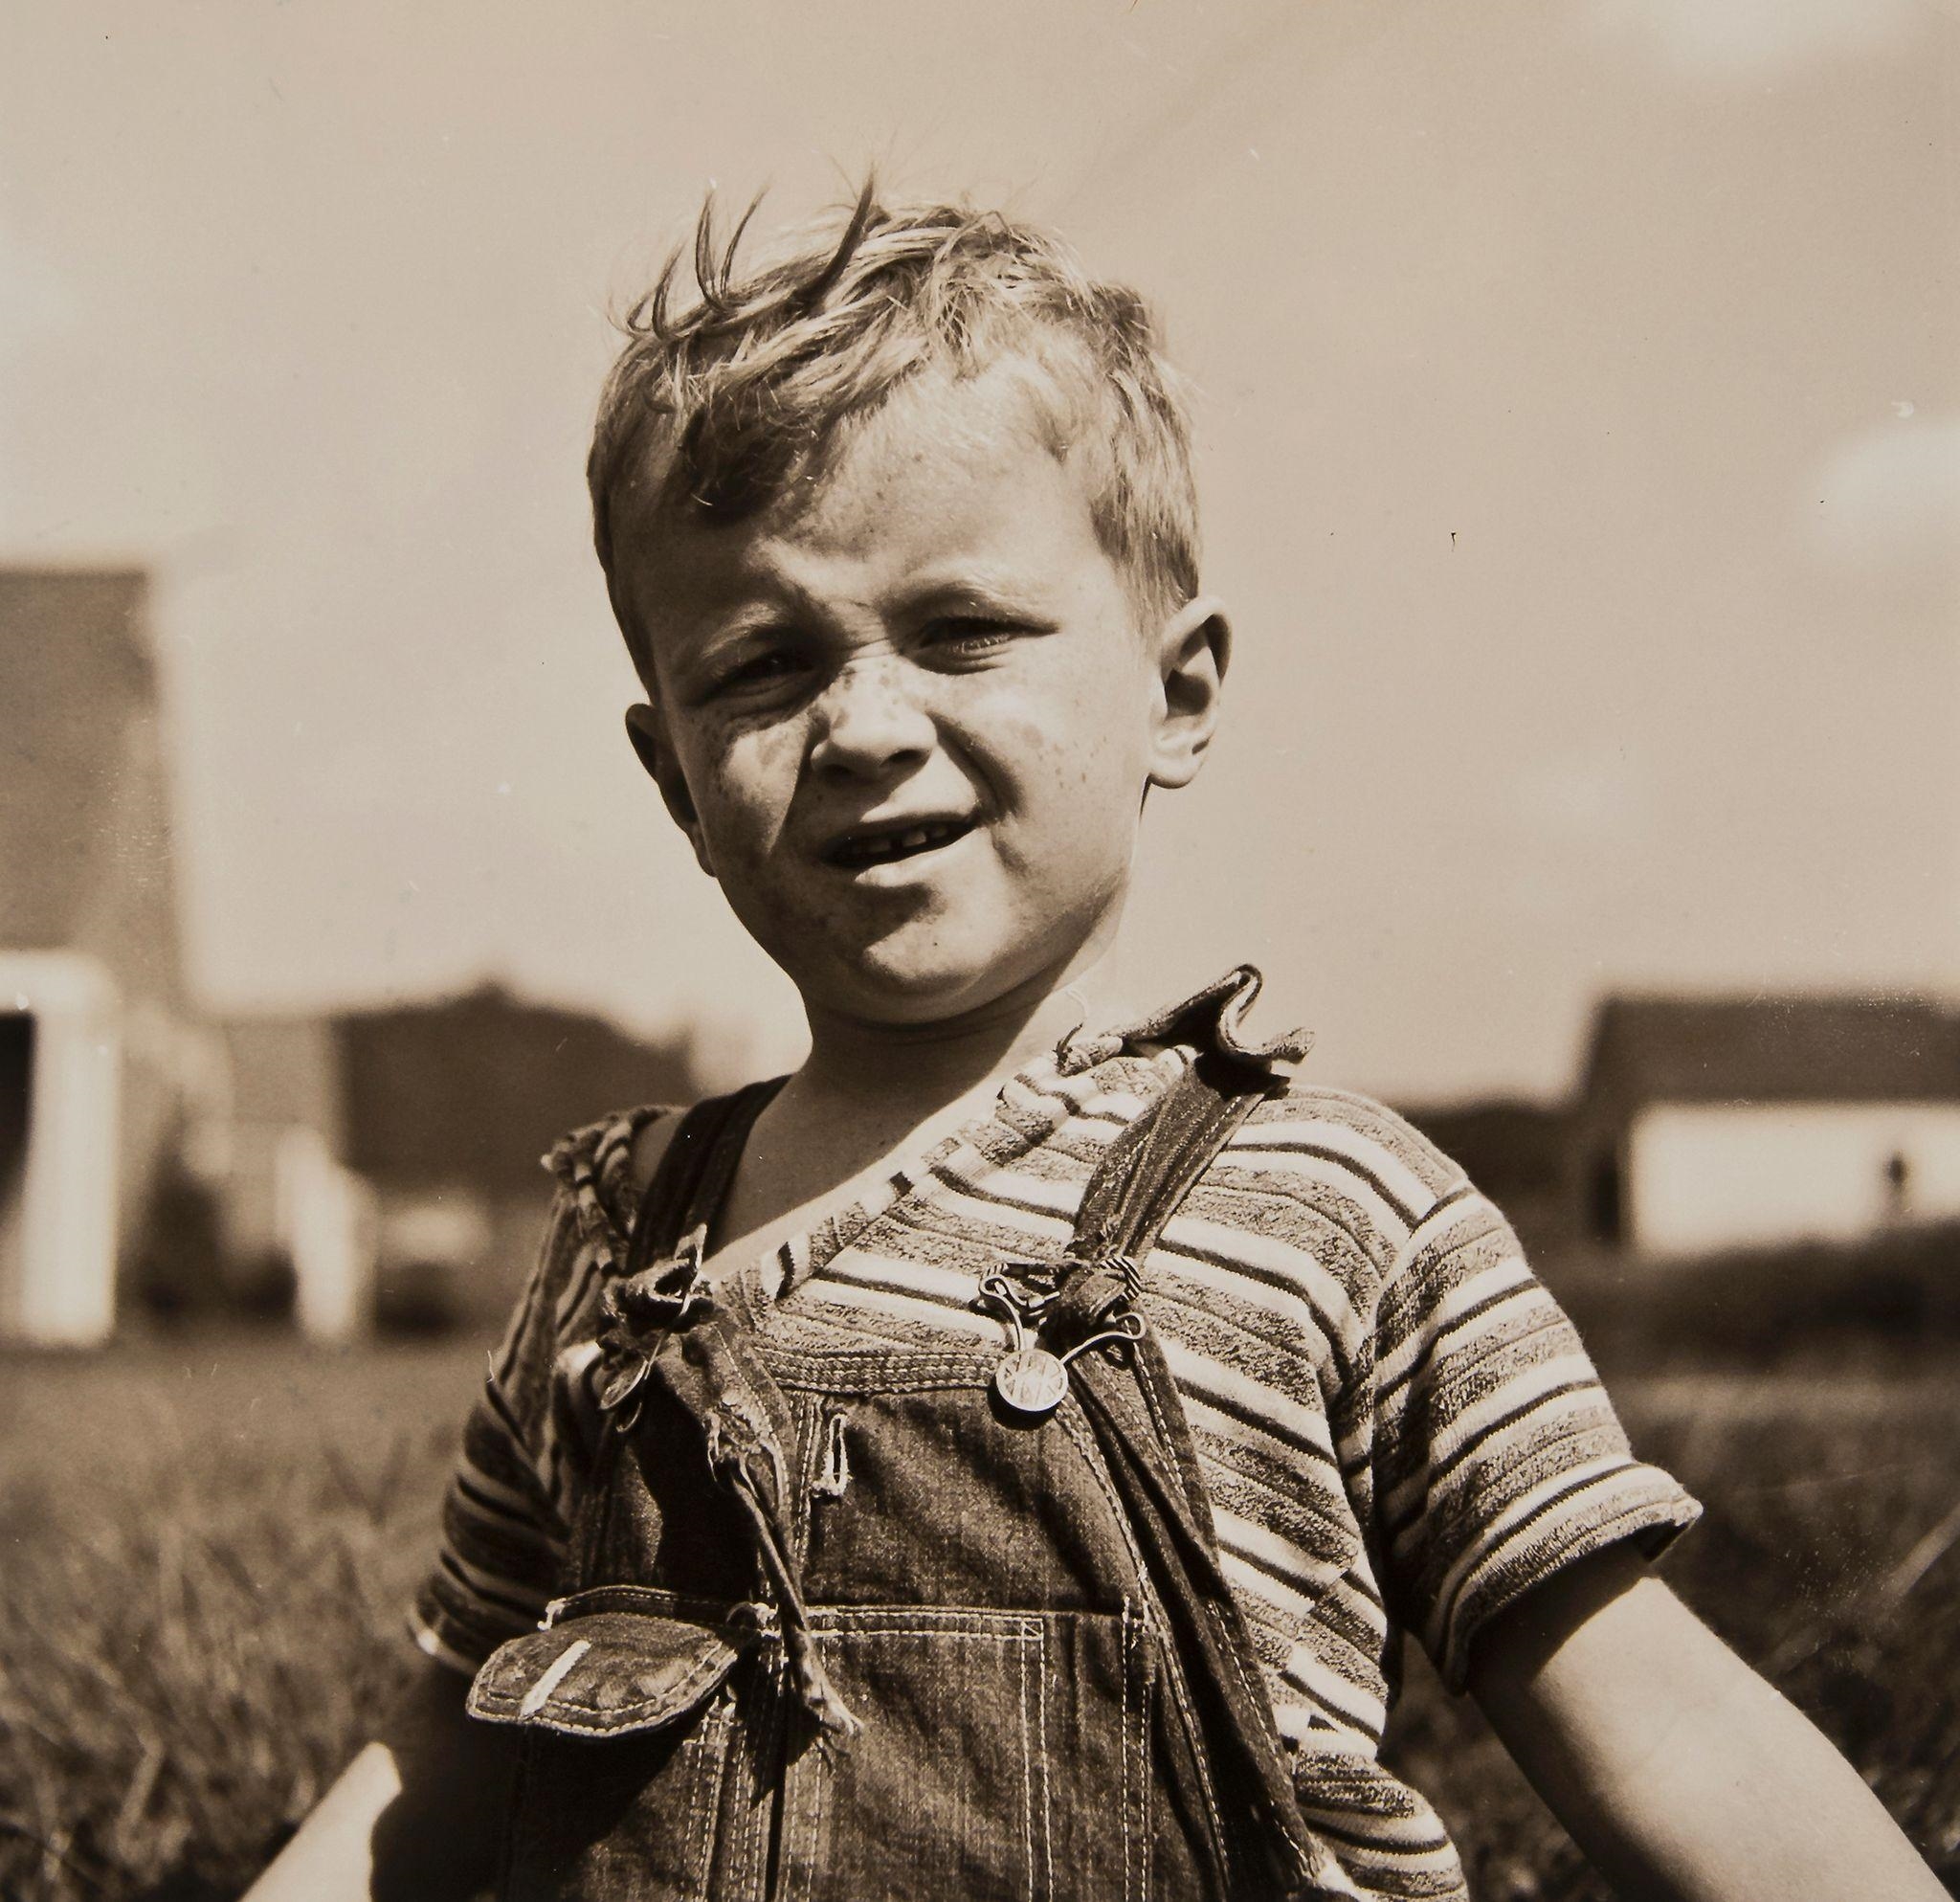 Son of Tygart Valley Homesteader, West Virginia by Marion Post Wolcott, 1938